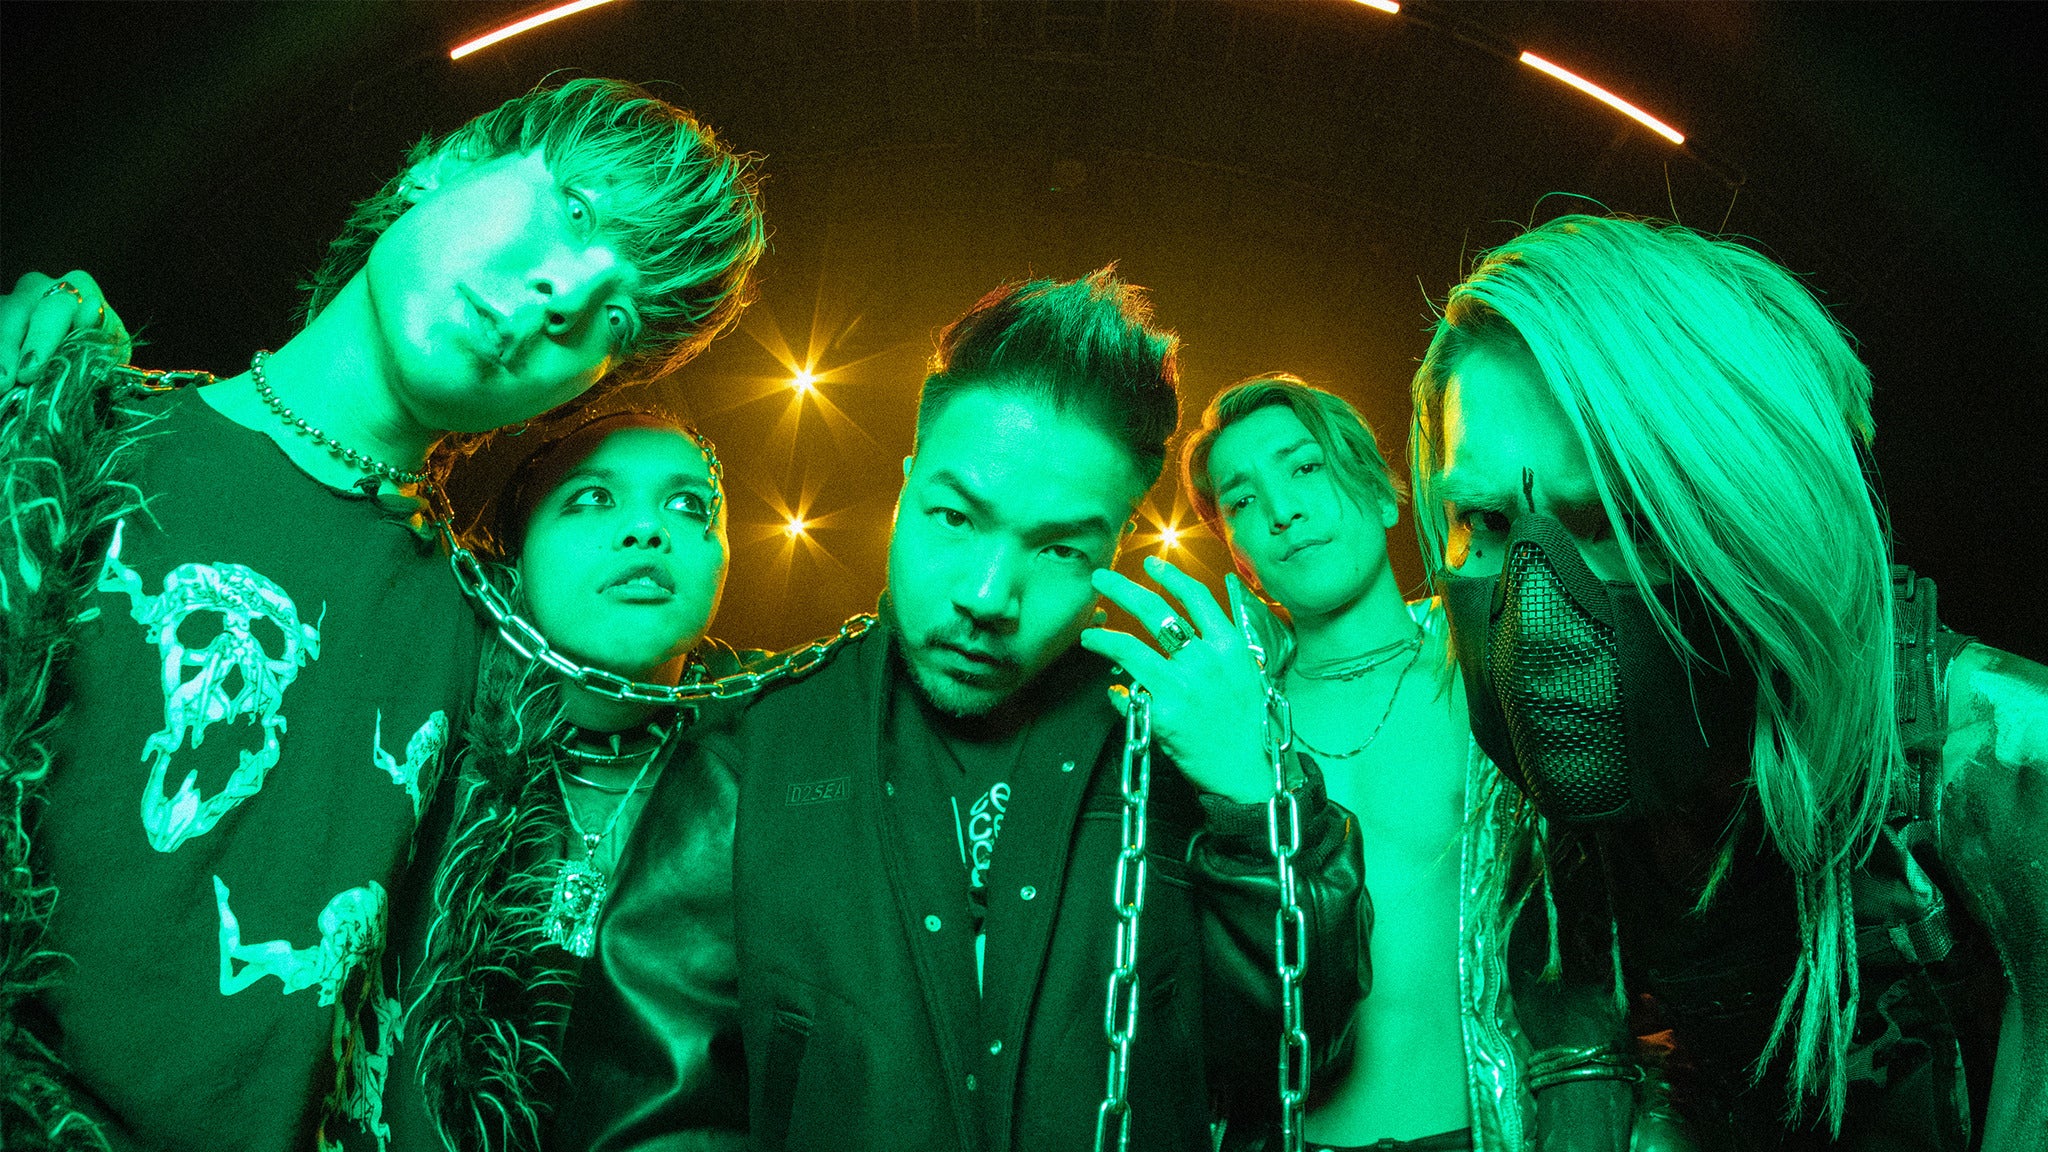 Image used with permission from Ticketmaster | Crossfaith tickets